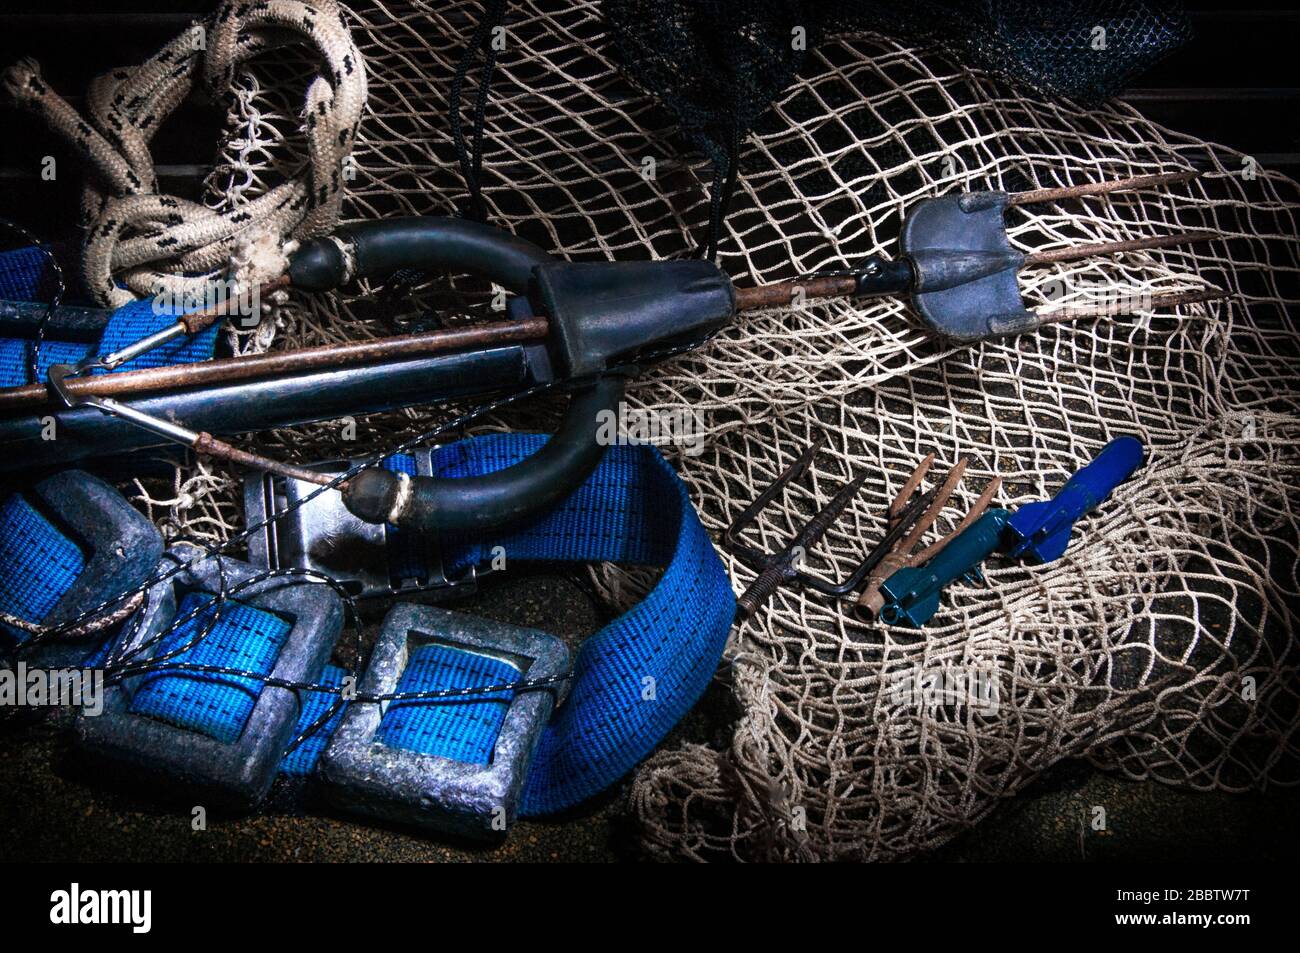 Details of scuba-diving and spear-fishing gear over a old fishing